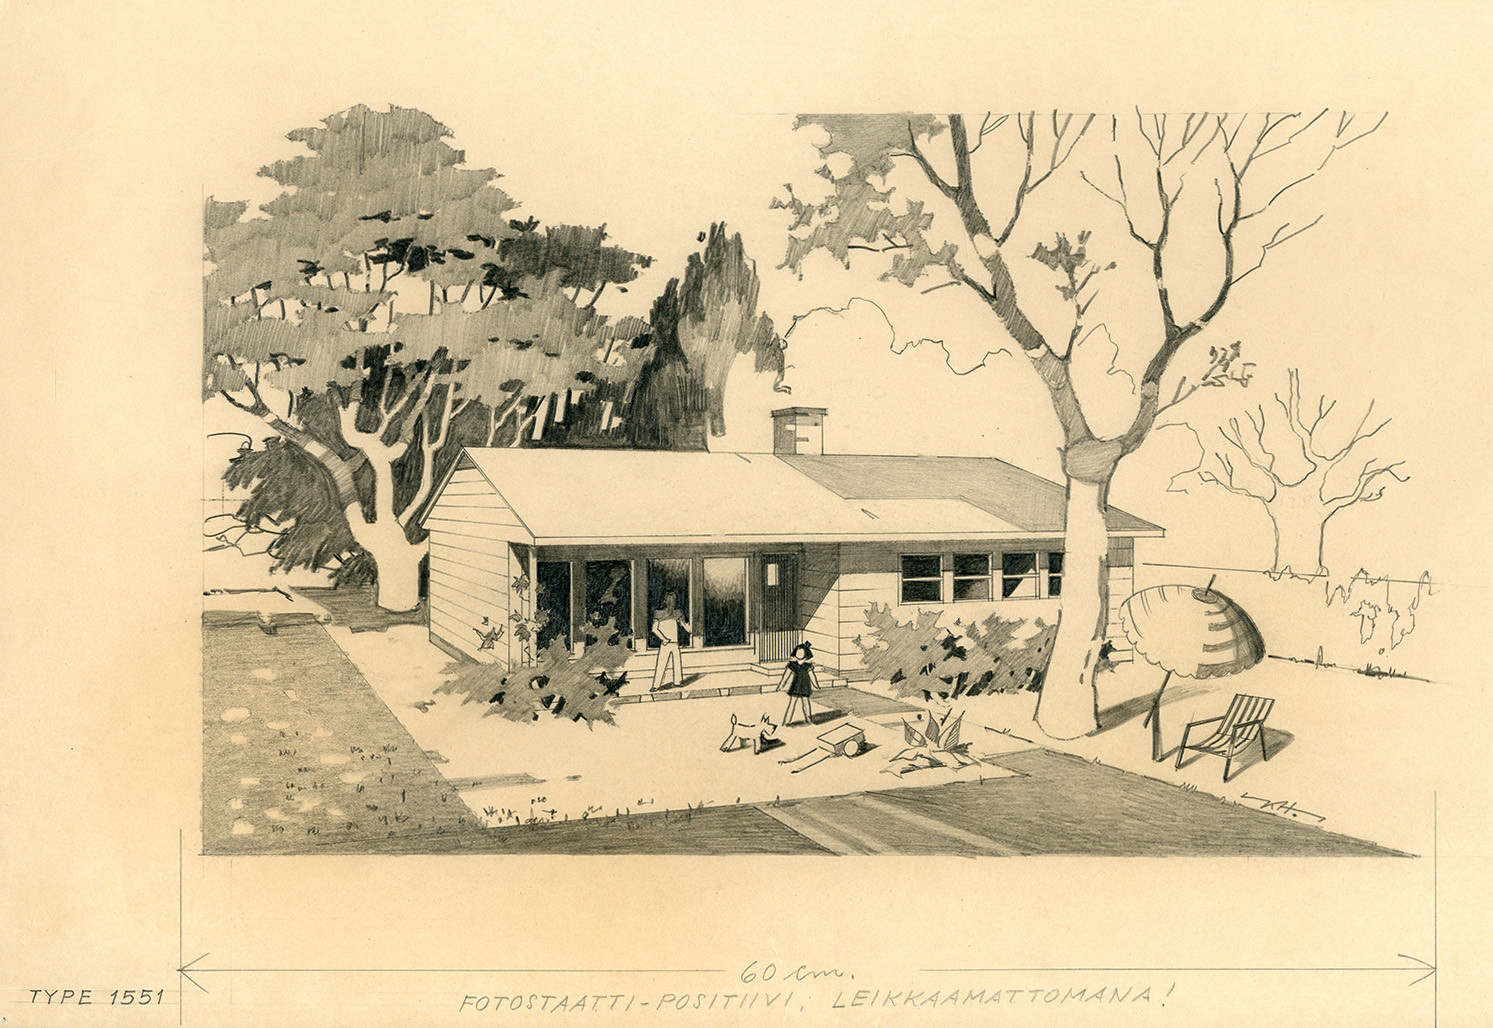 Perspective drawing of Puutalo Oy's wooden house. The father of the family is on the porch watching a child and a dog playing in the lush green yard.